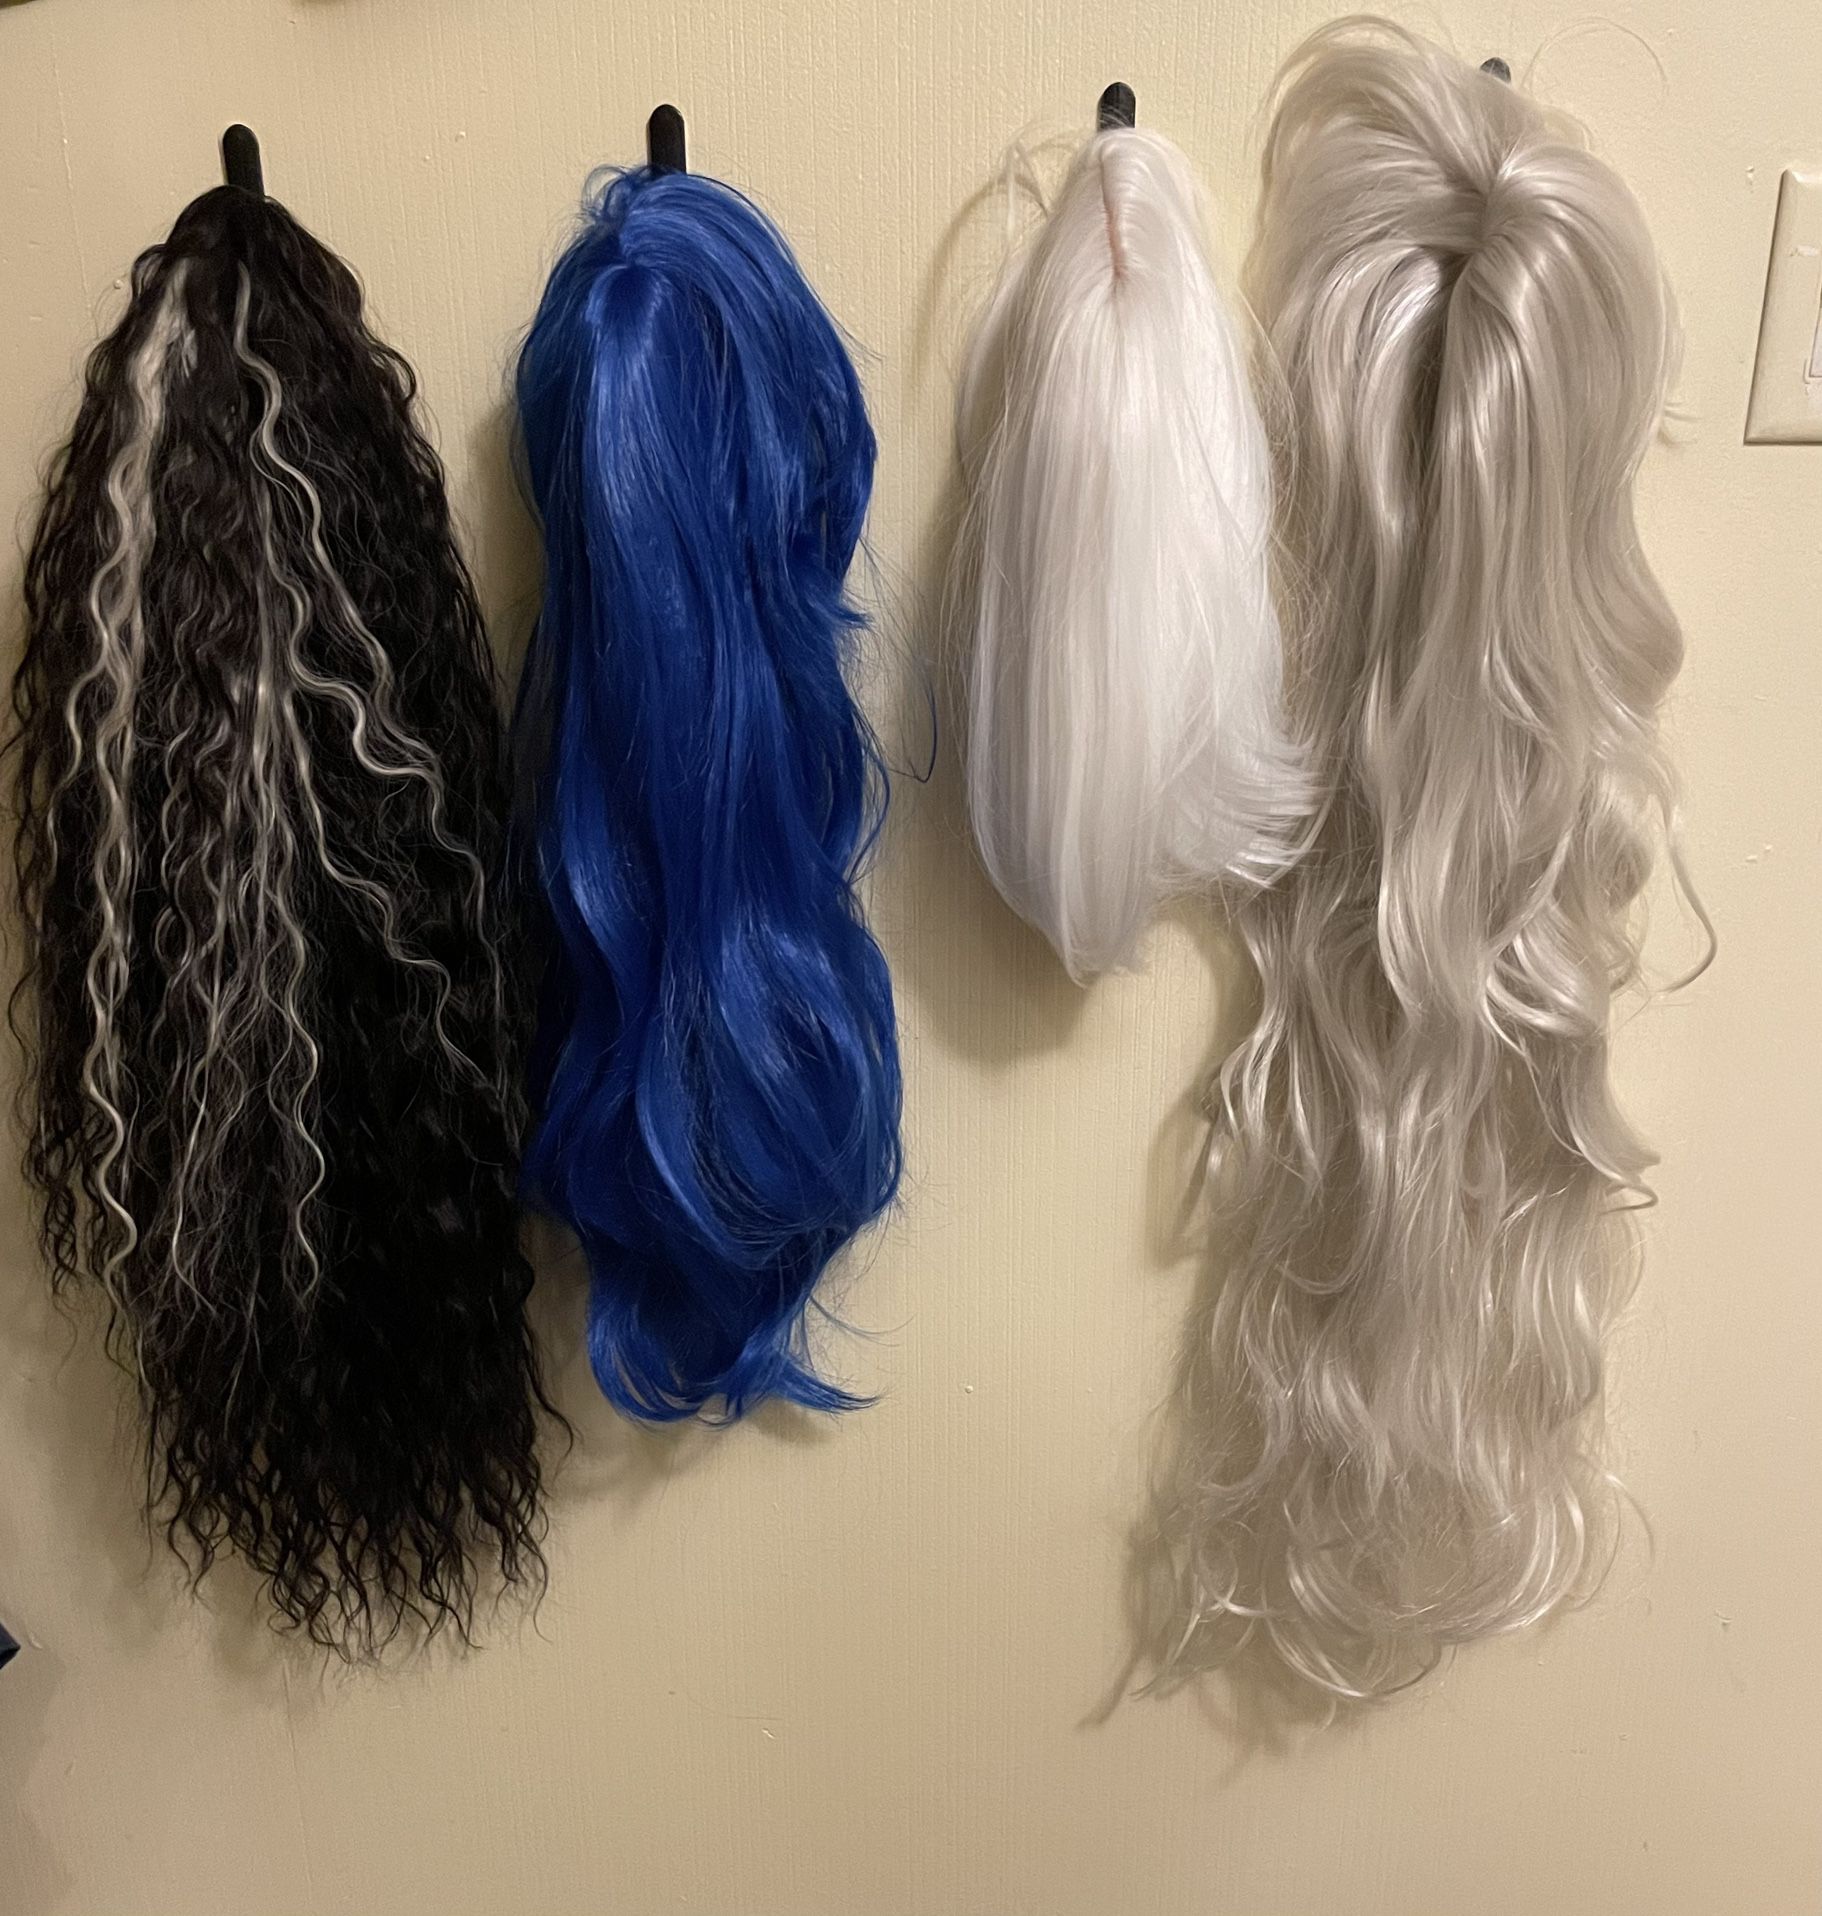 4 Synthetic Wigs